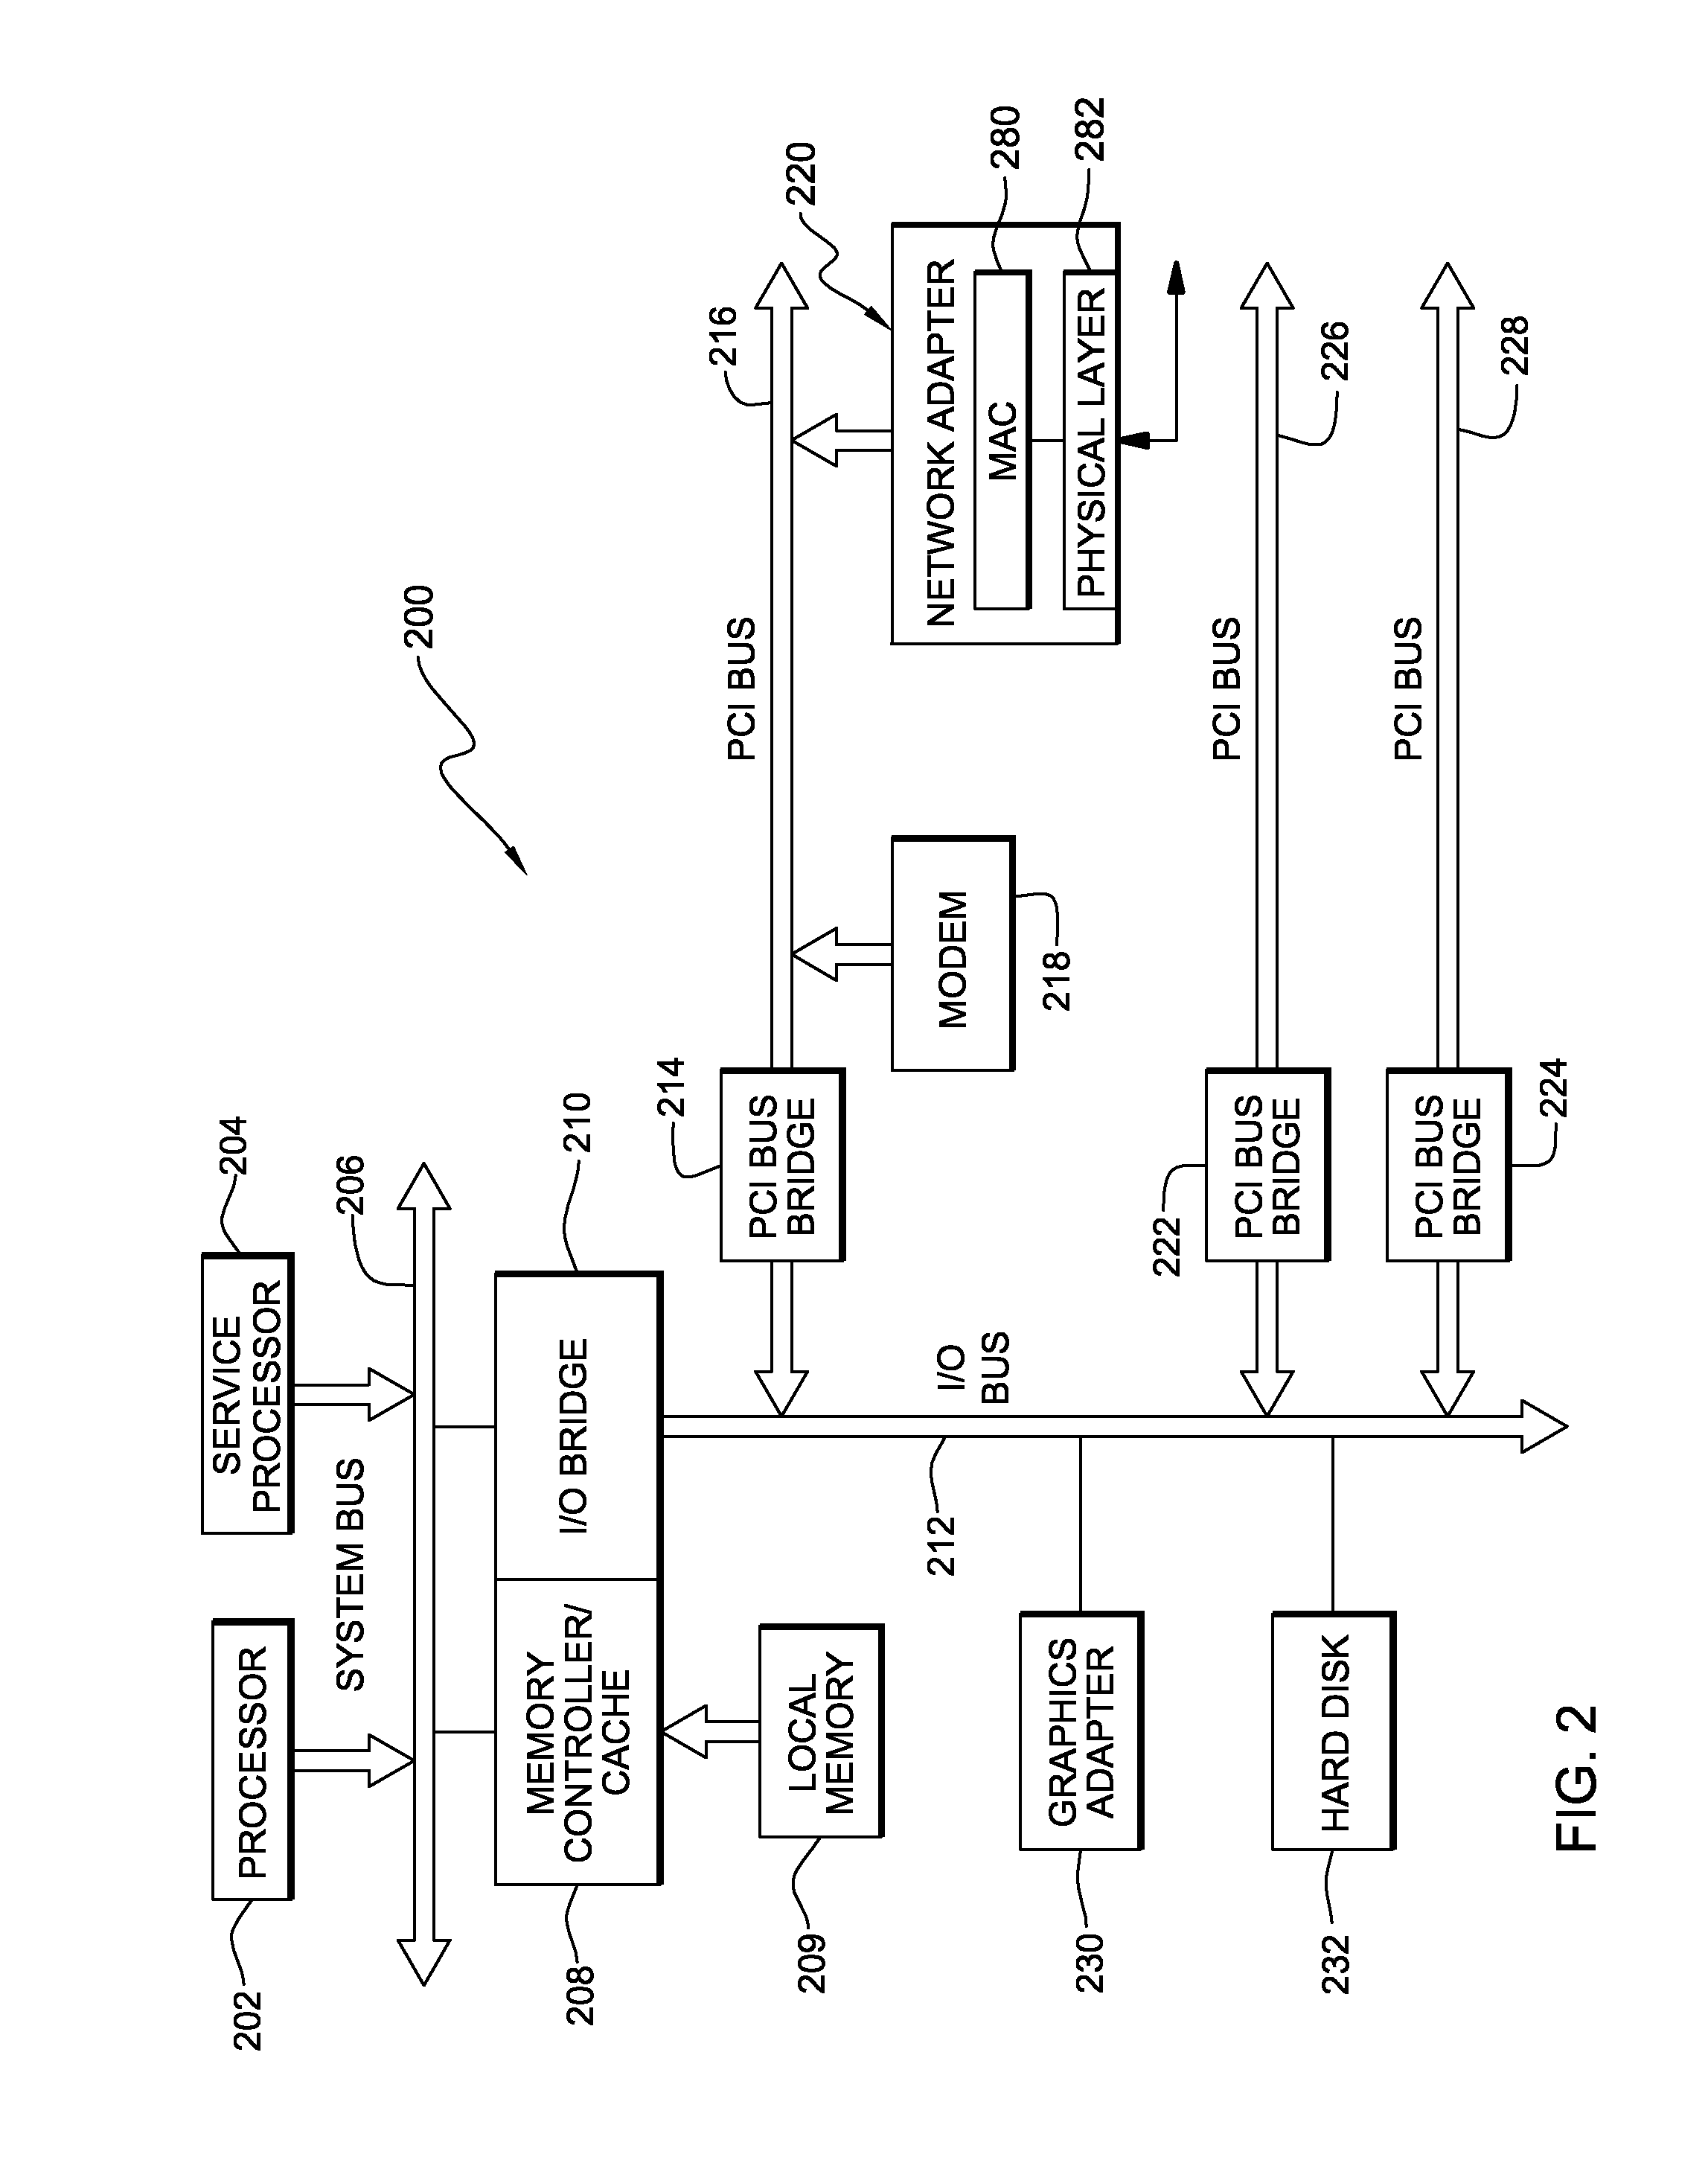 Dynamic Control of Partition Memory Affinity in a Shared Memory Partition Data Processing System